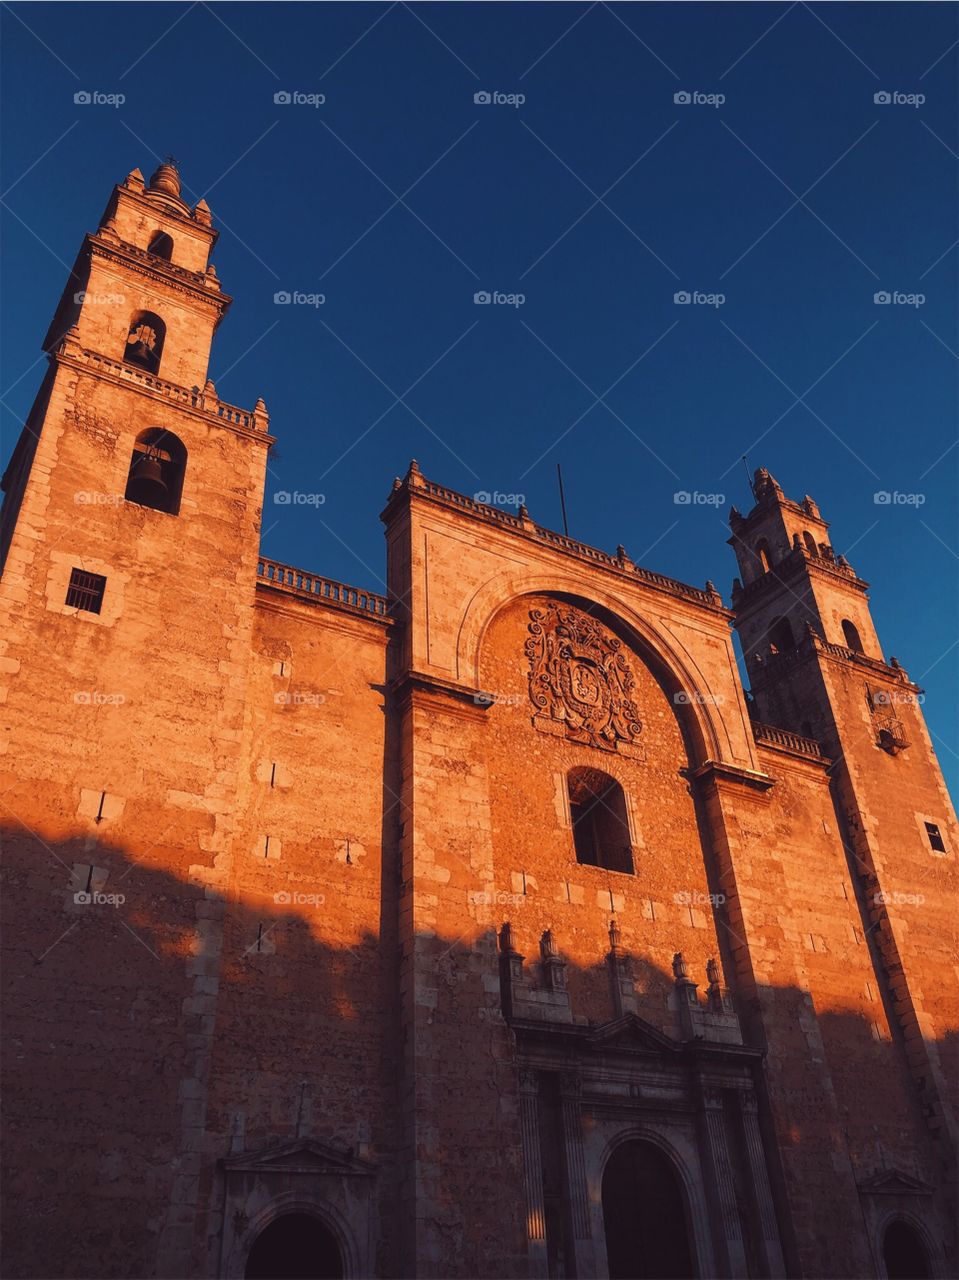 Mexico City, Mexico. The sun sets & reflects onto this building for a wonderful picture of blue & orange alike.